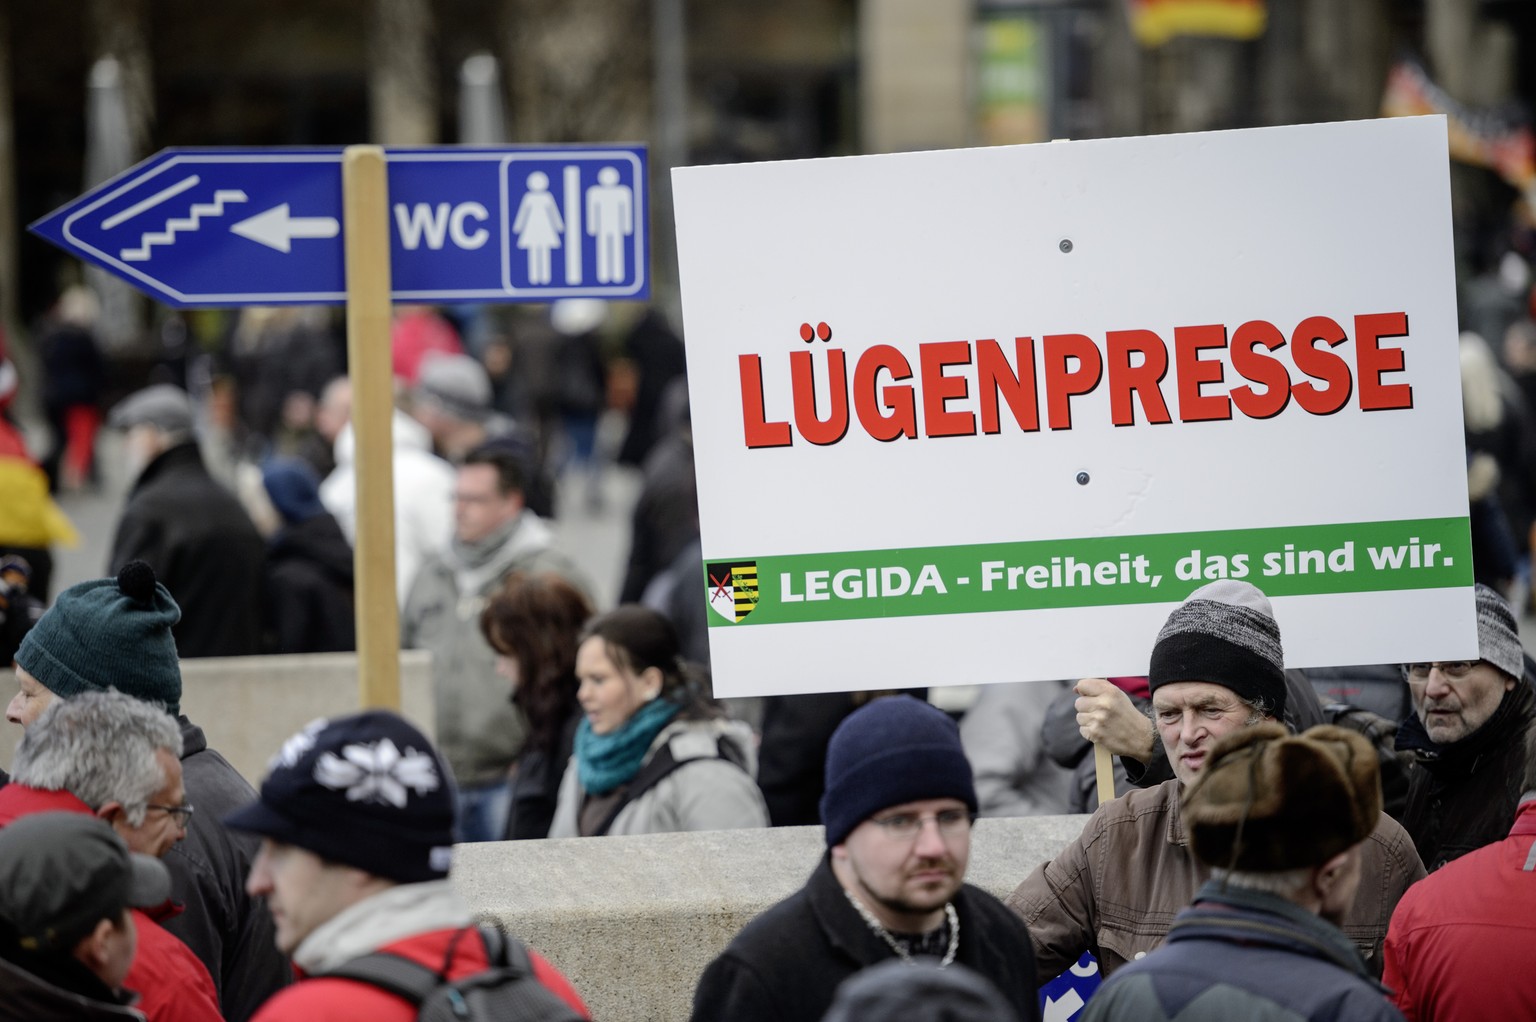 DRESDEN, GERMANY - APRIL 06: Supporters of the Pegida movement gather for another of their weekly protests on Easter Monday at a rally on April 6, 2015 in Dresden, Germany. The Pegida movement, which  ...